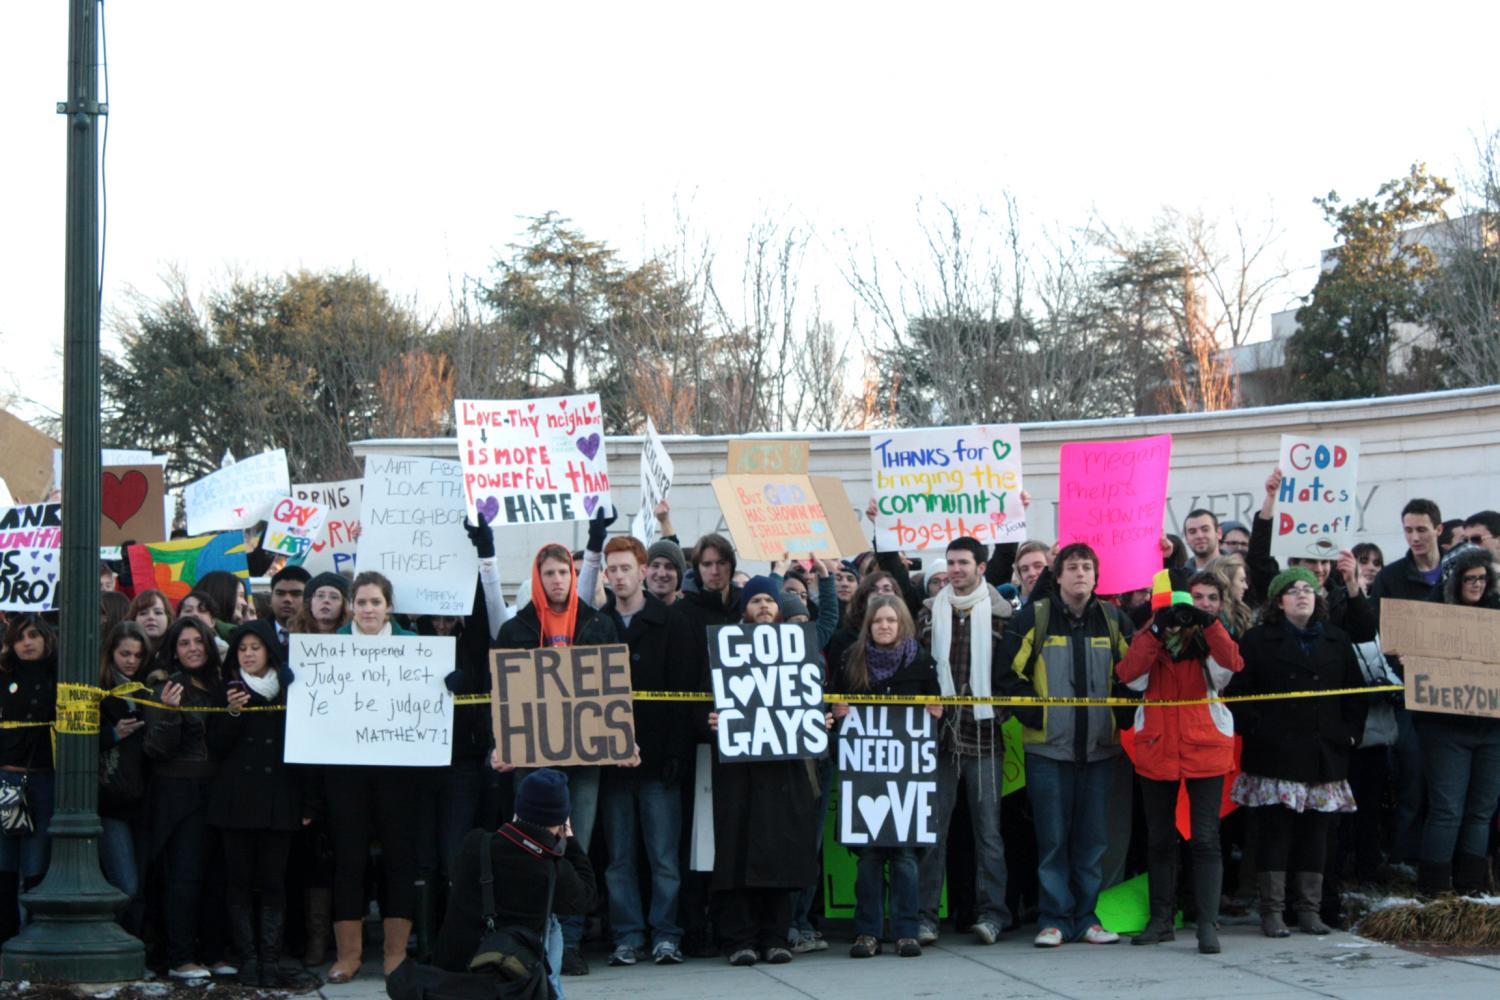 Quotes from the Westboro Baptist Church Rally